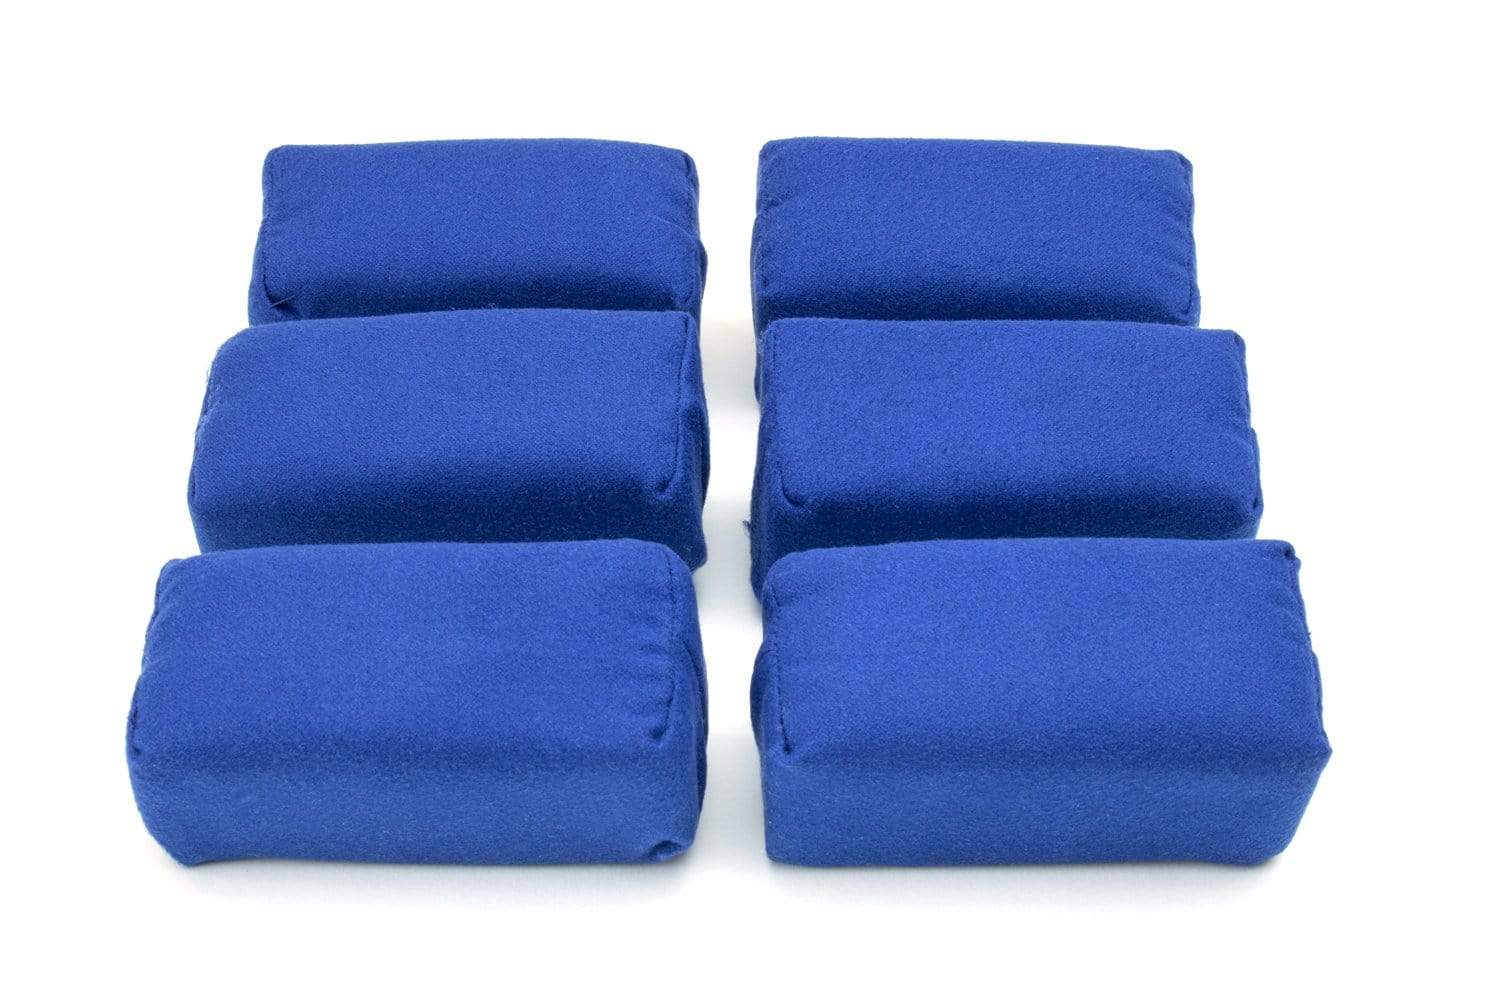 Autofiber Thick [Saver Applicator Terry] Ceramic Coating Applicator Sponge  | 12 Pack | with Plastic Barrier to Reduce Product Waste. (Blue/Gray)